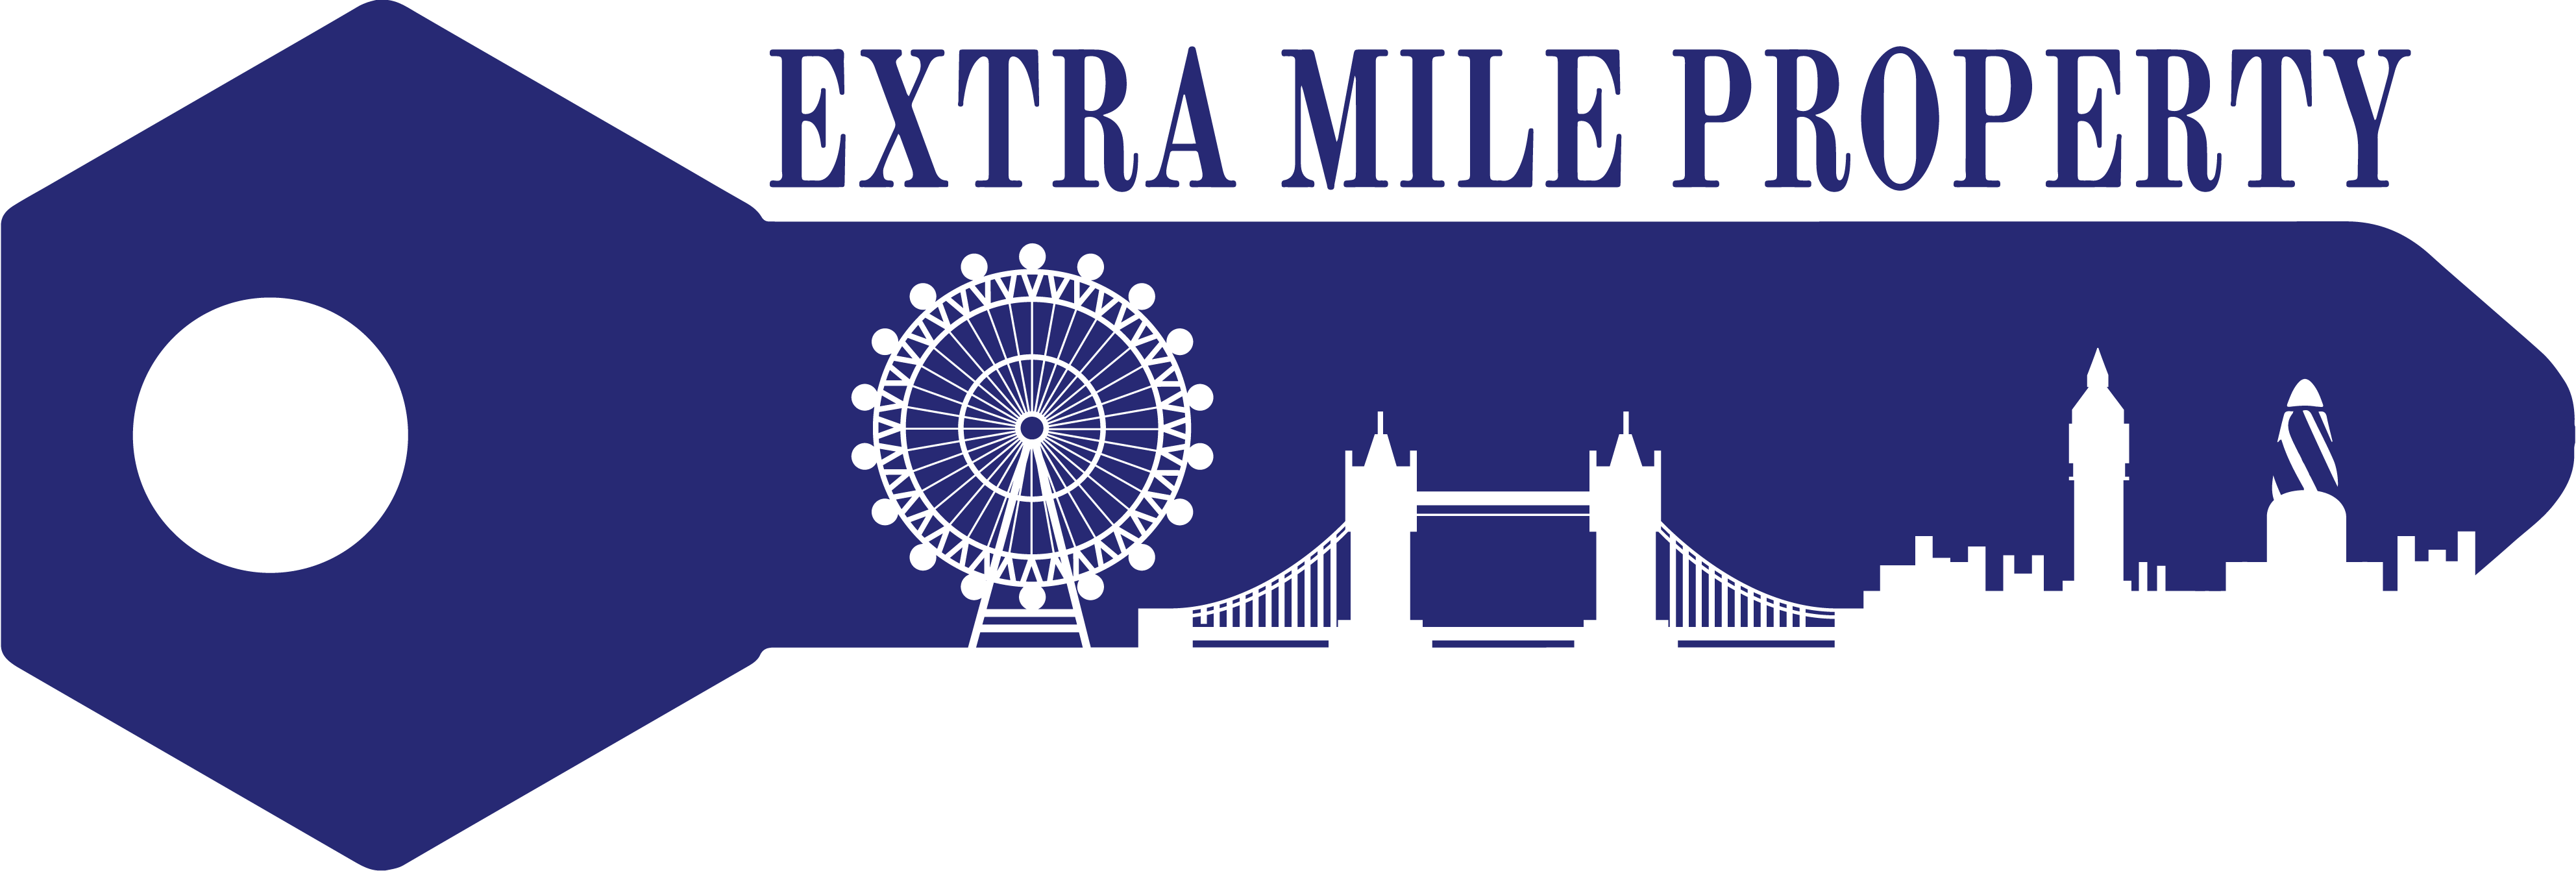 Extra Mile Property - London : Letting agents in Deptford Greater London Lewisham